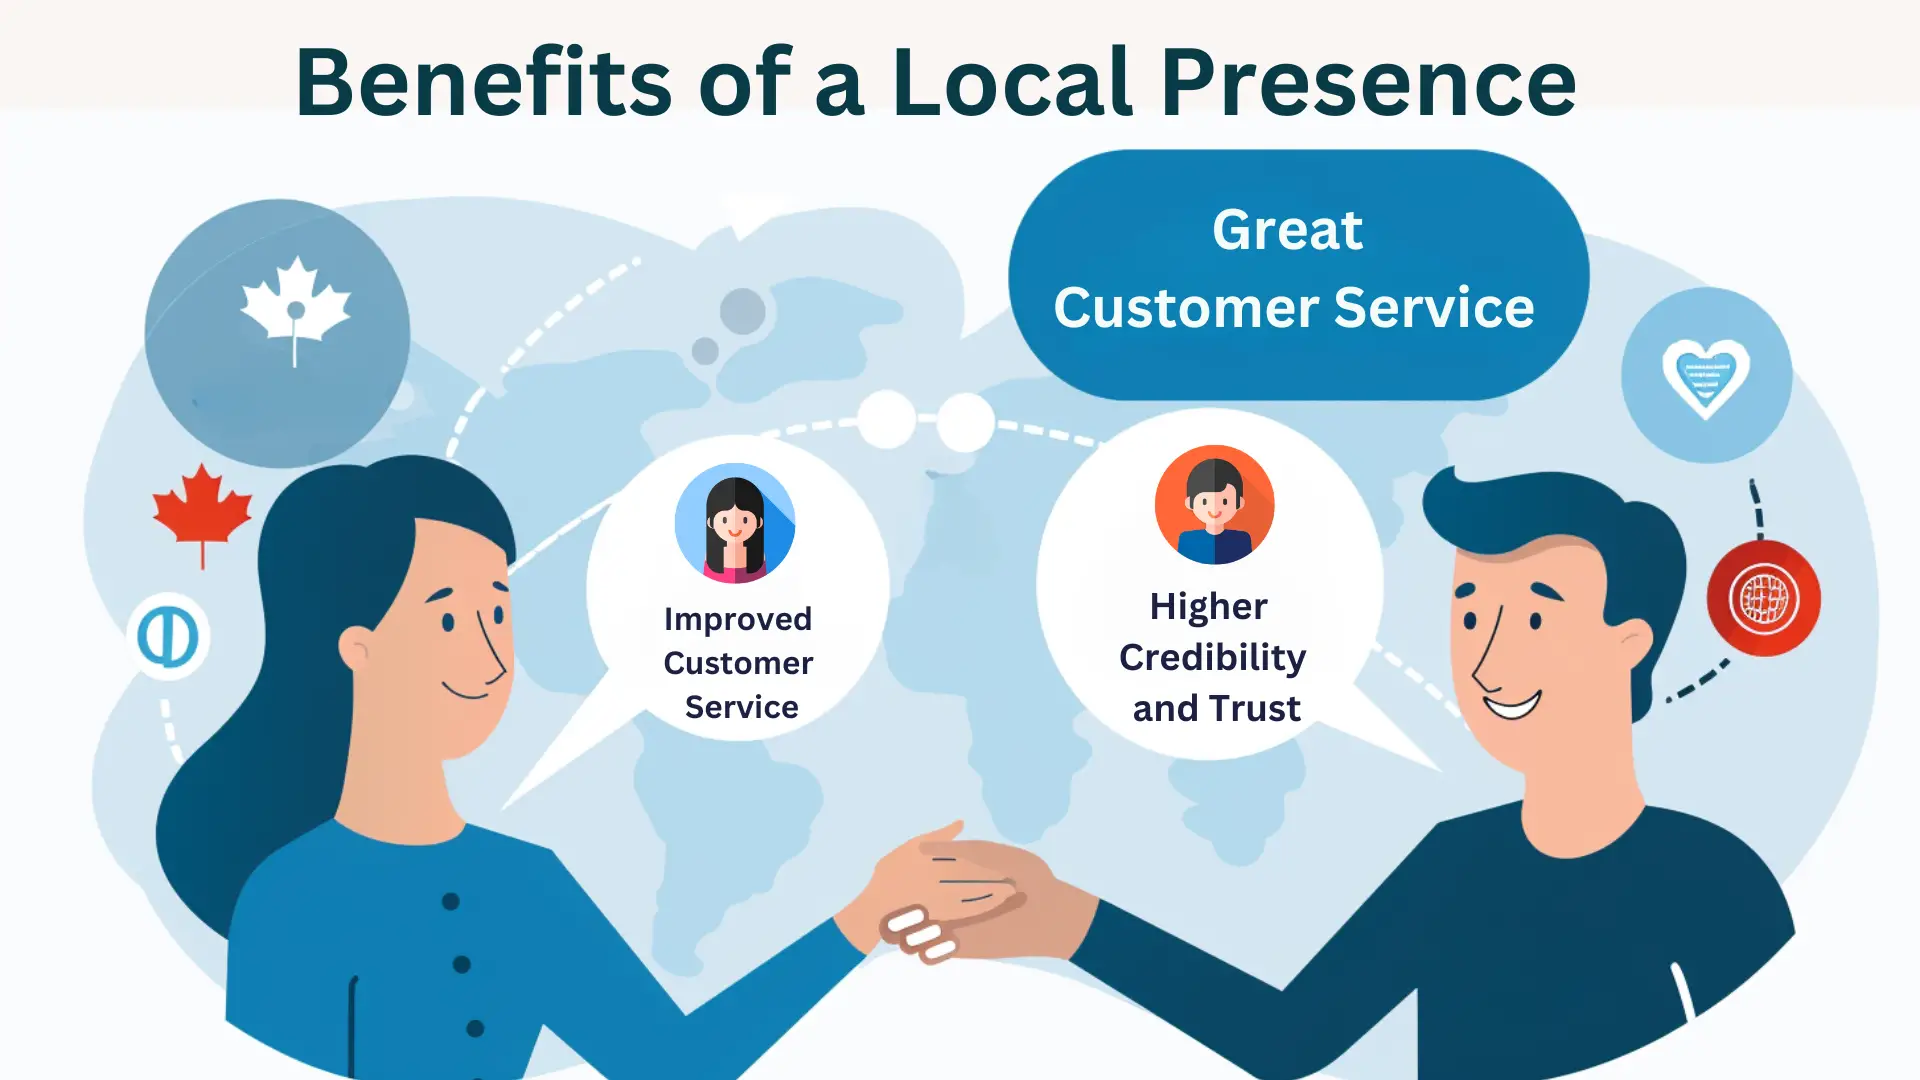 Benefits of Local Presence